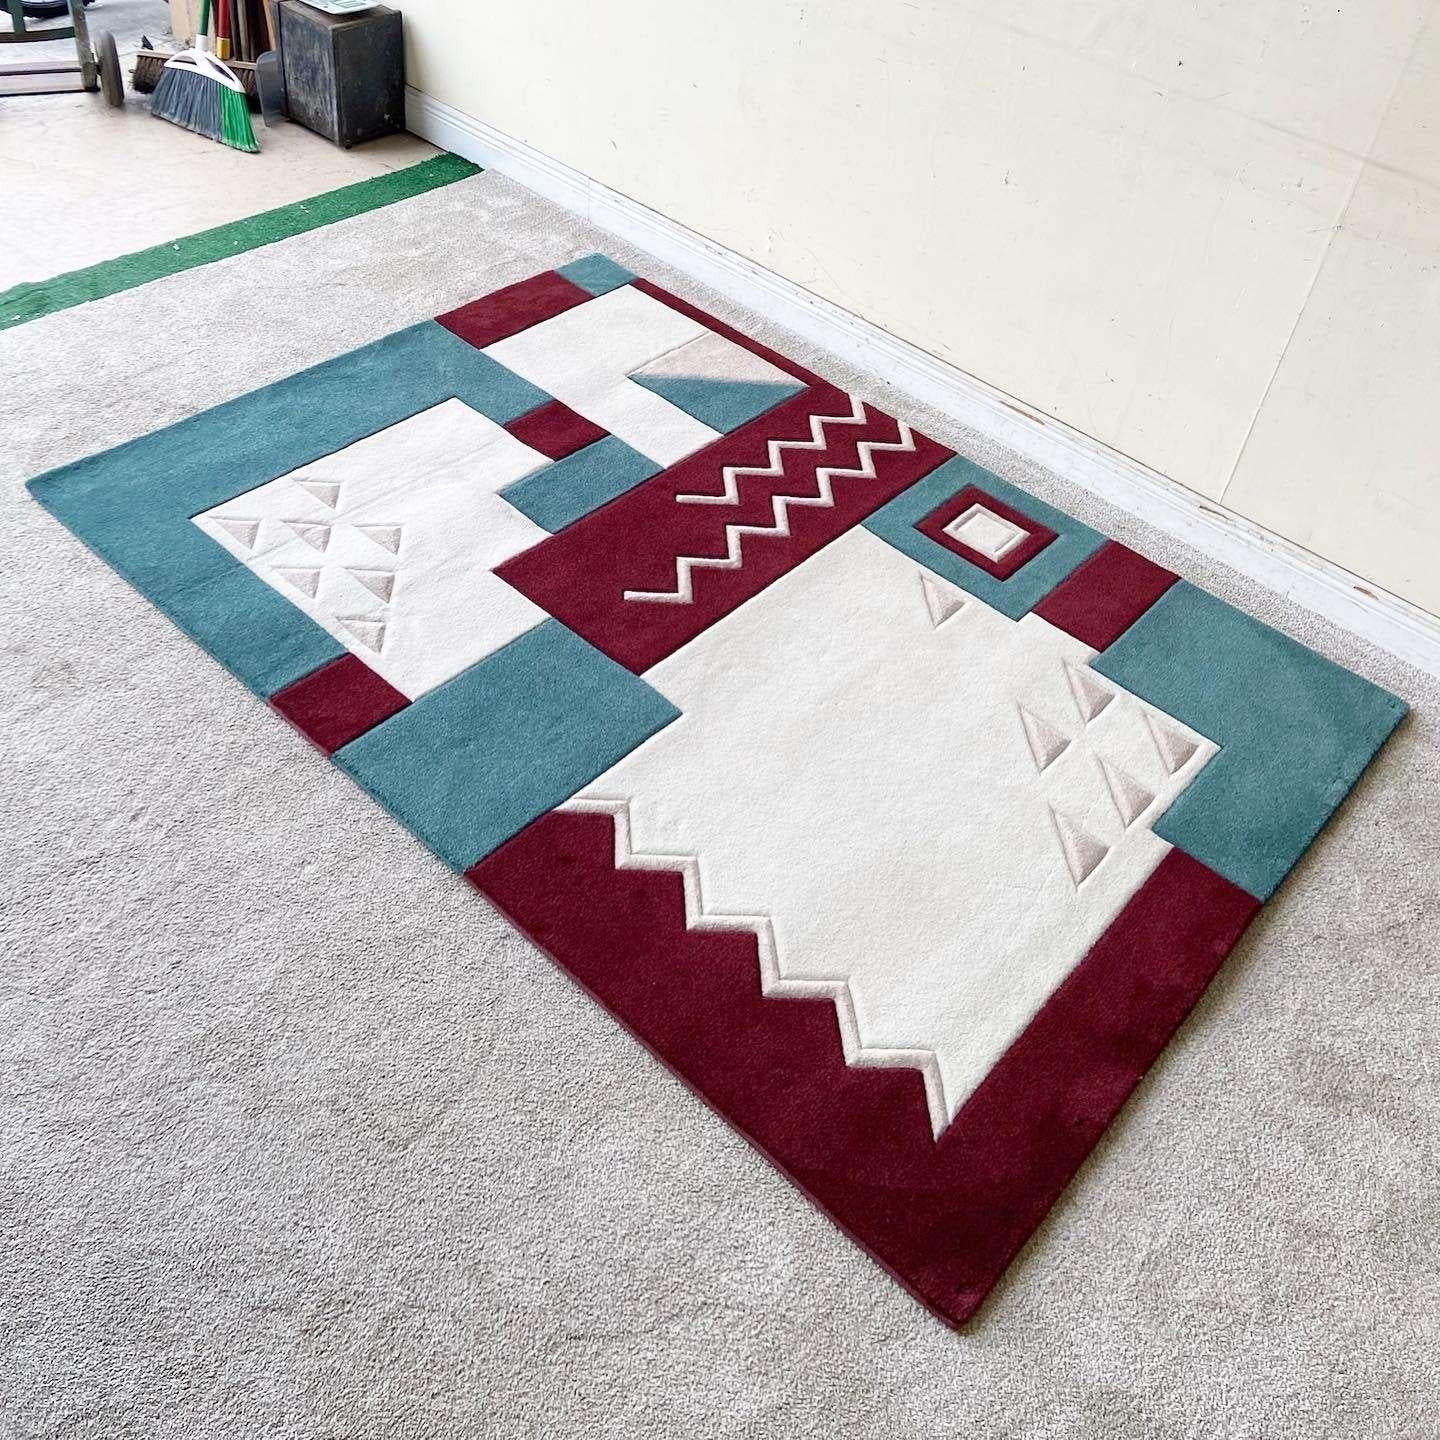 Exceptional vintage postmodern area rug. Features a tessellation of maroon and blue shapes with beige and off white sections embedded with triangles and zig zigs.

Rug 1
